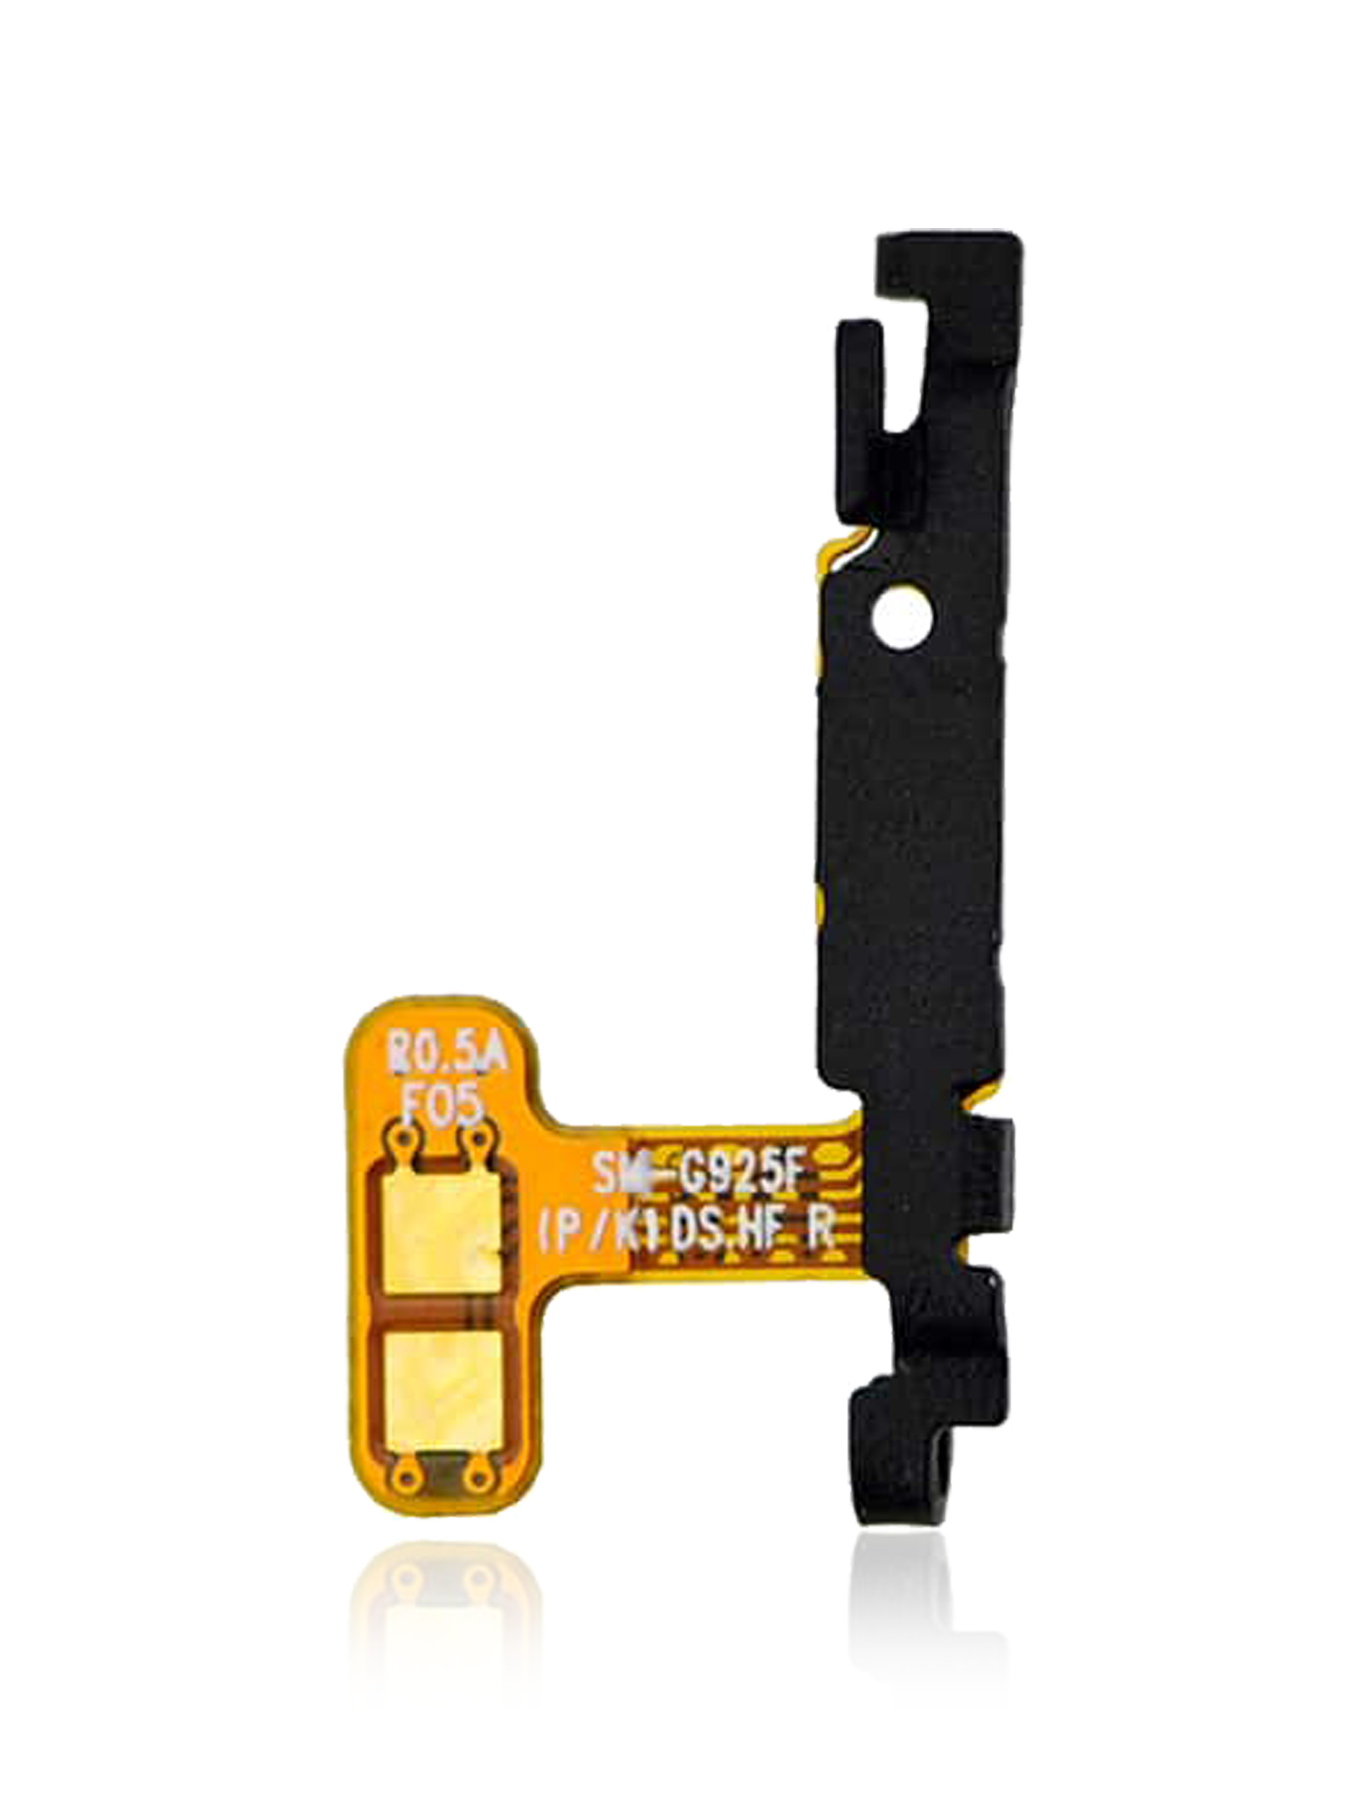 For Samsung Galaxy S6 Edge Power Button Flex Cable Replacement